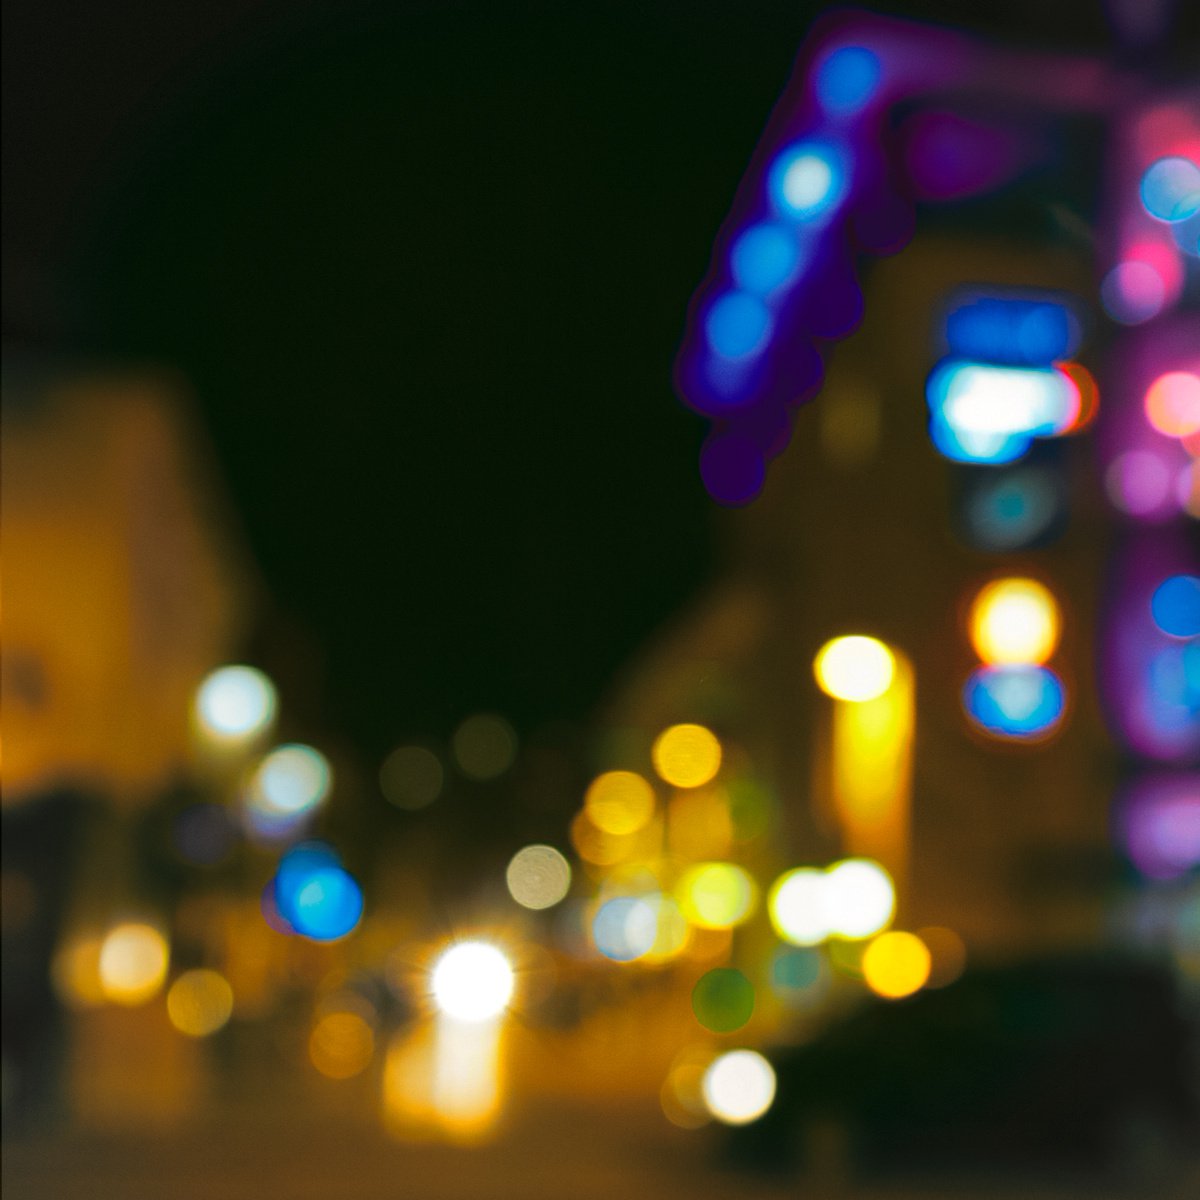 City Lights 6. Limited Edition Abstract Photograph Print #1/15. Nighttime abstract photog... by Graham Briggs